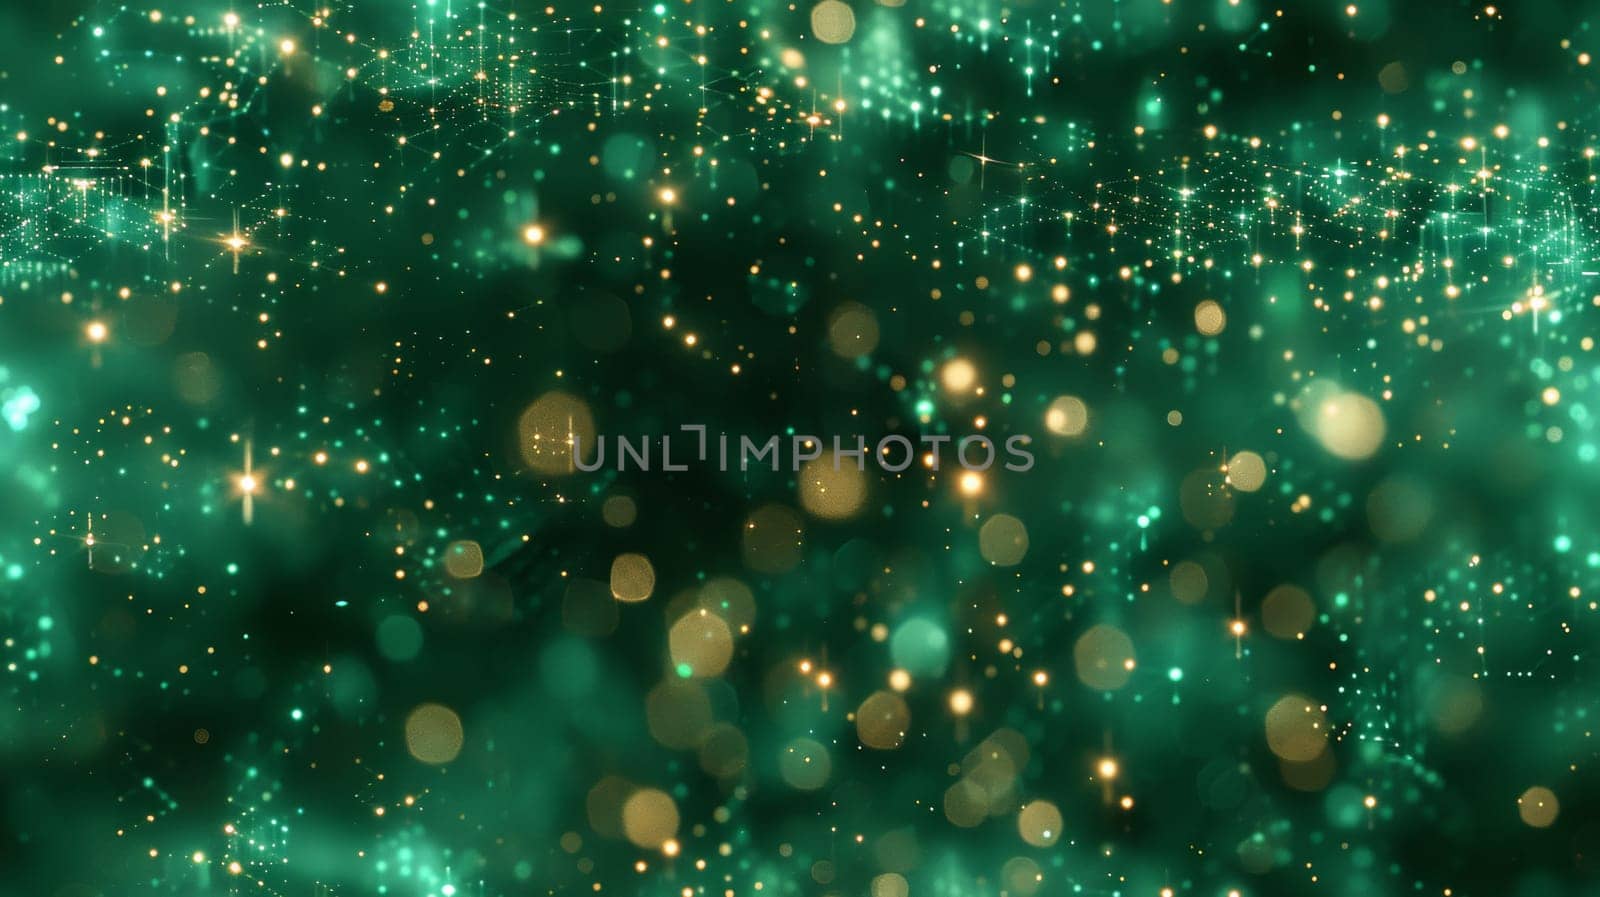 A green abstract background. Scene is bright and festive, evoking feelings of joy.